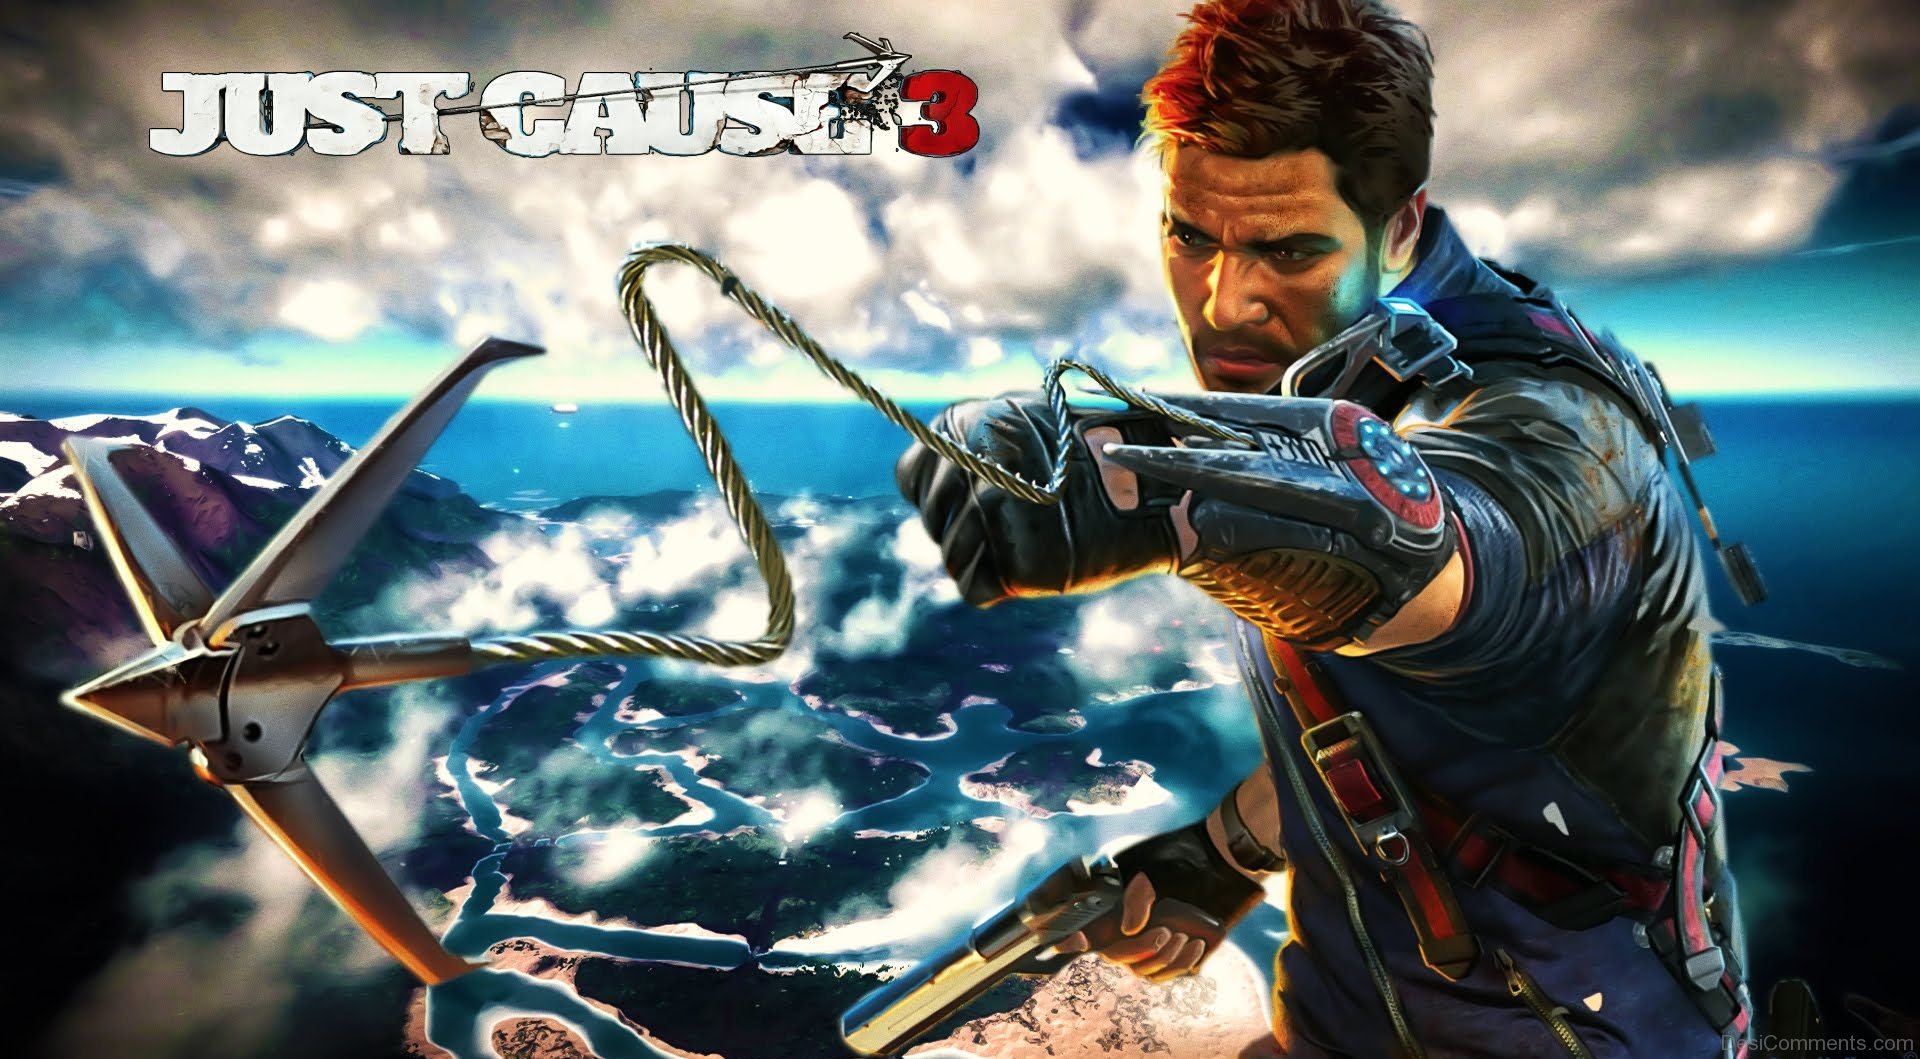 Just Cause Poster Desiments